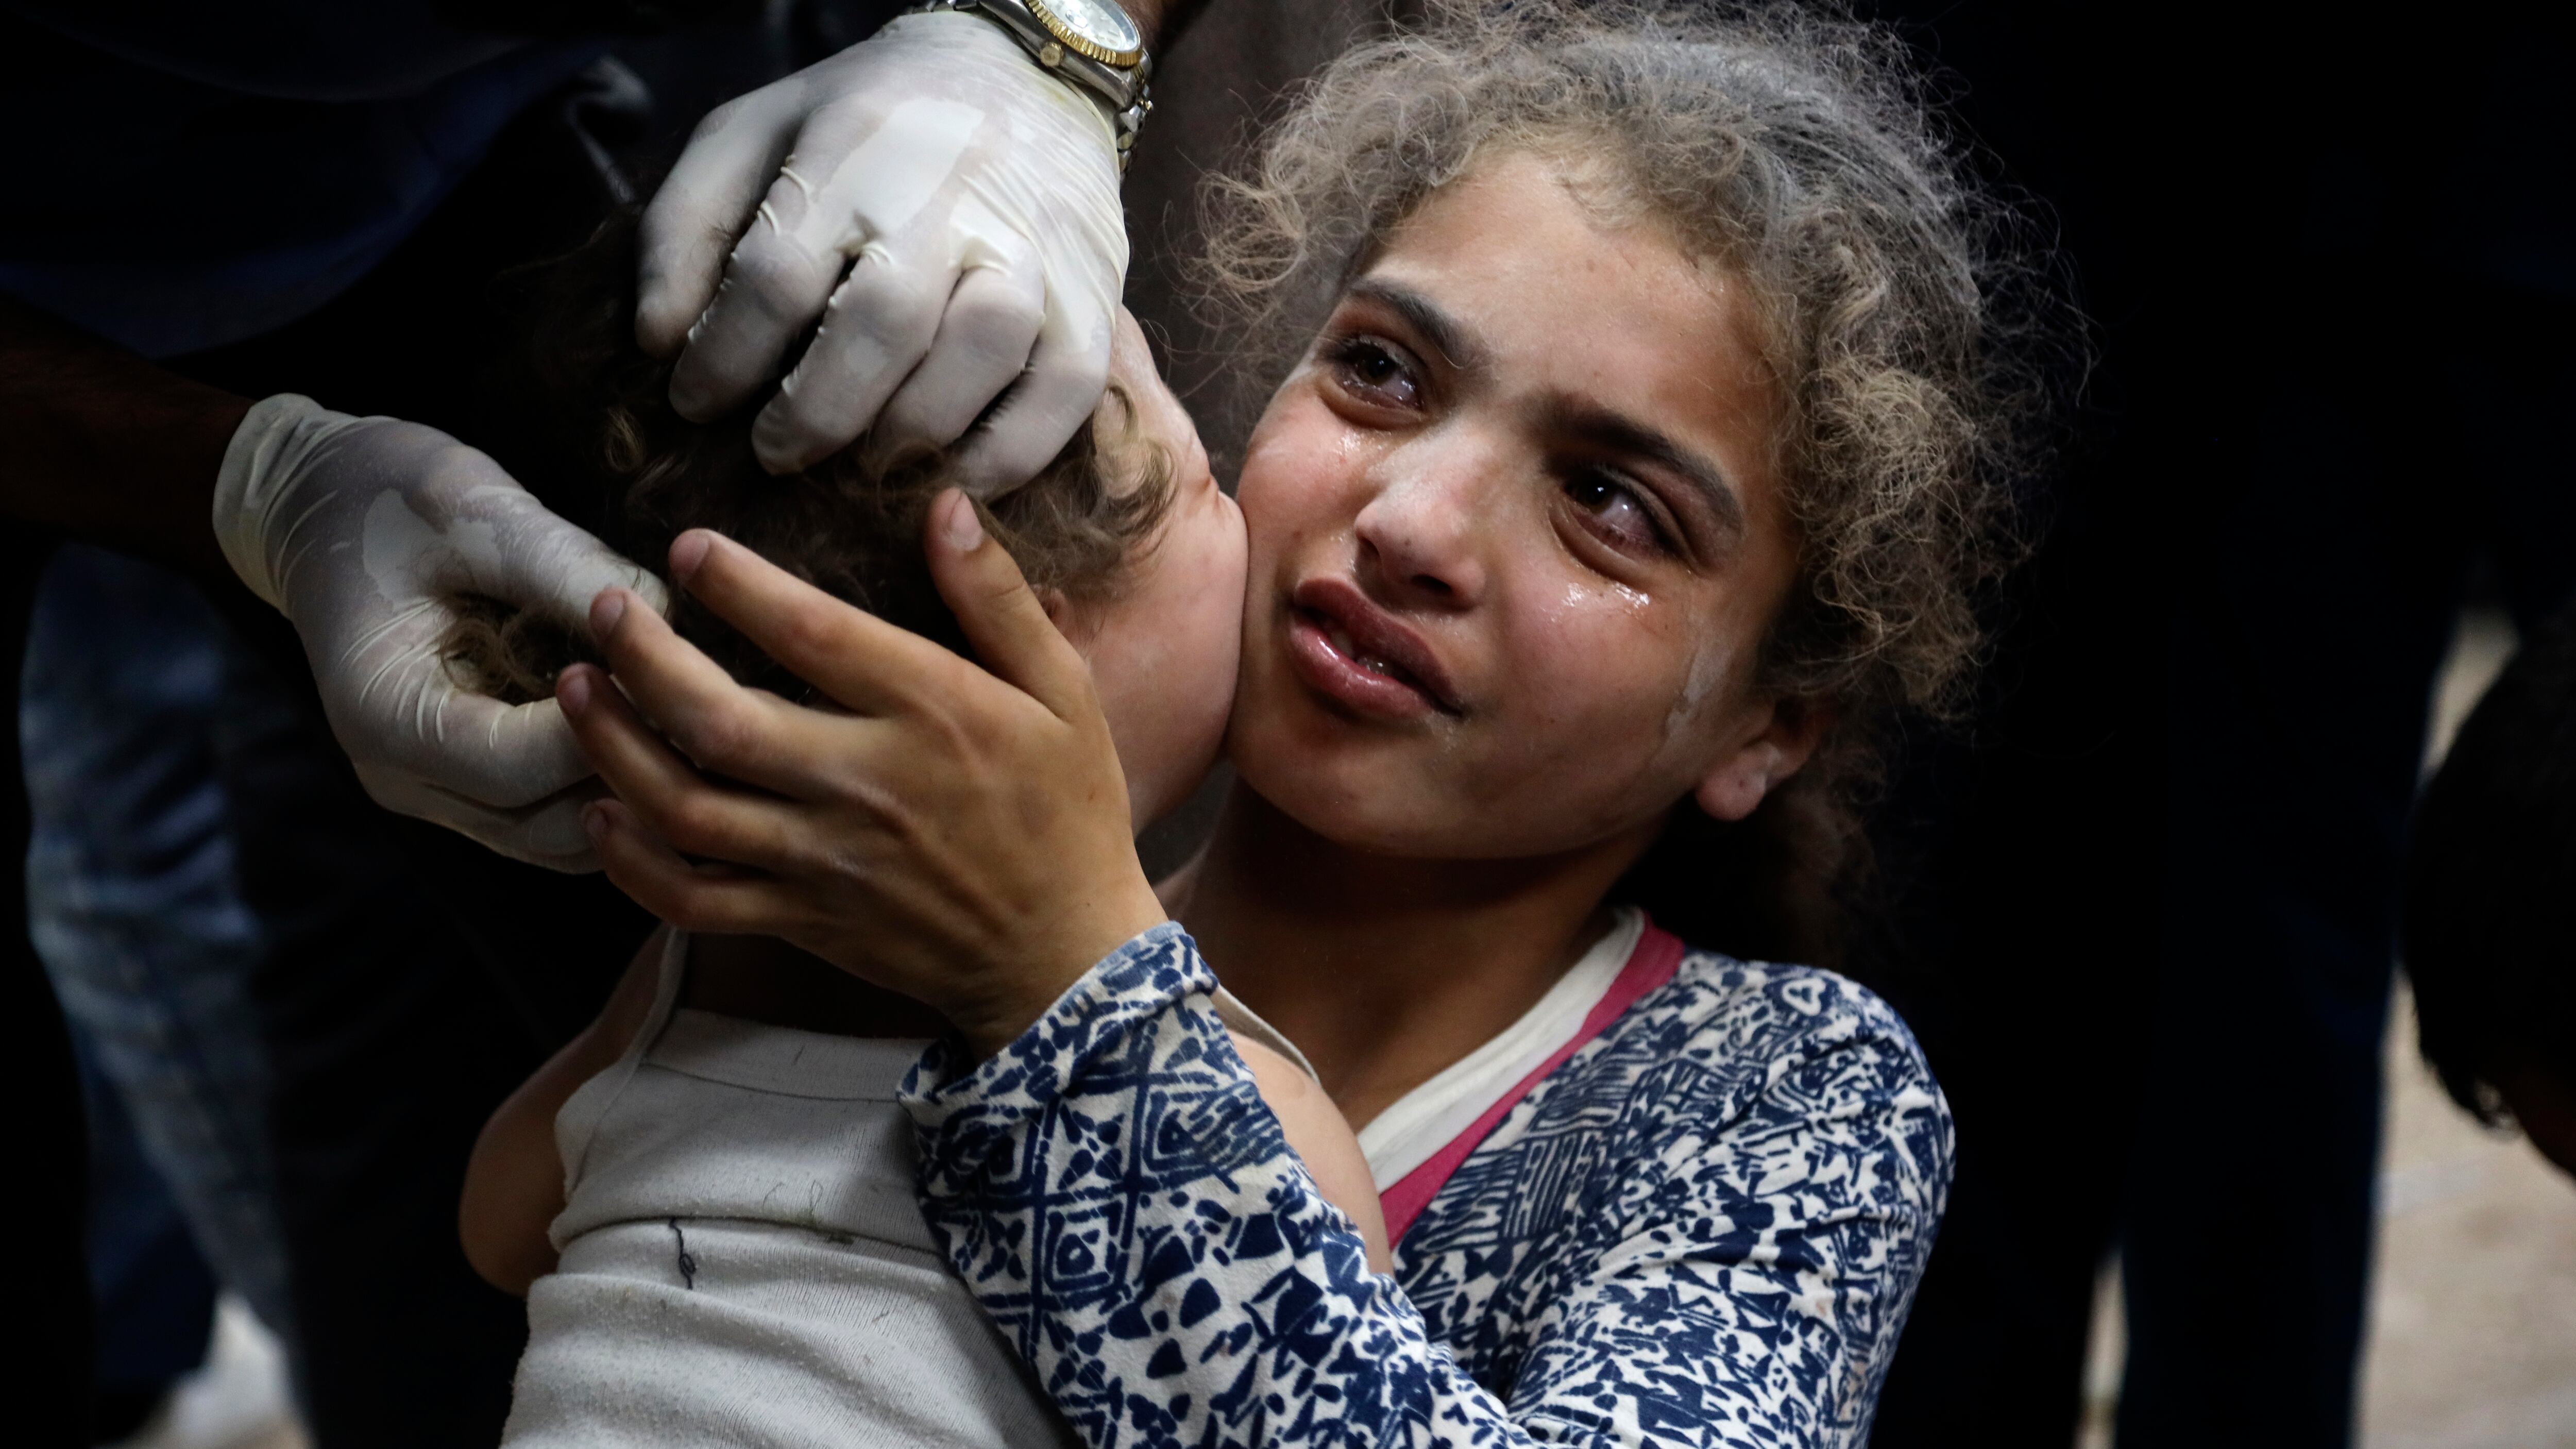 Palestinian children wounded in the Israeli bombardment on a residential building in Bureij refugee camp, are treated at al-Aqsa Martyrs hospital in Deir al-Balah, central Gaza Strip (AP)